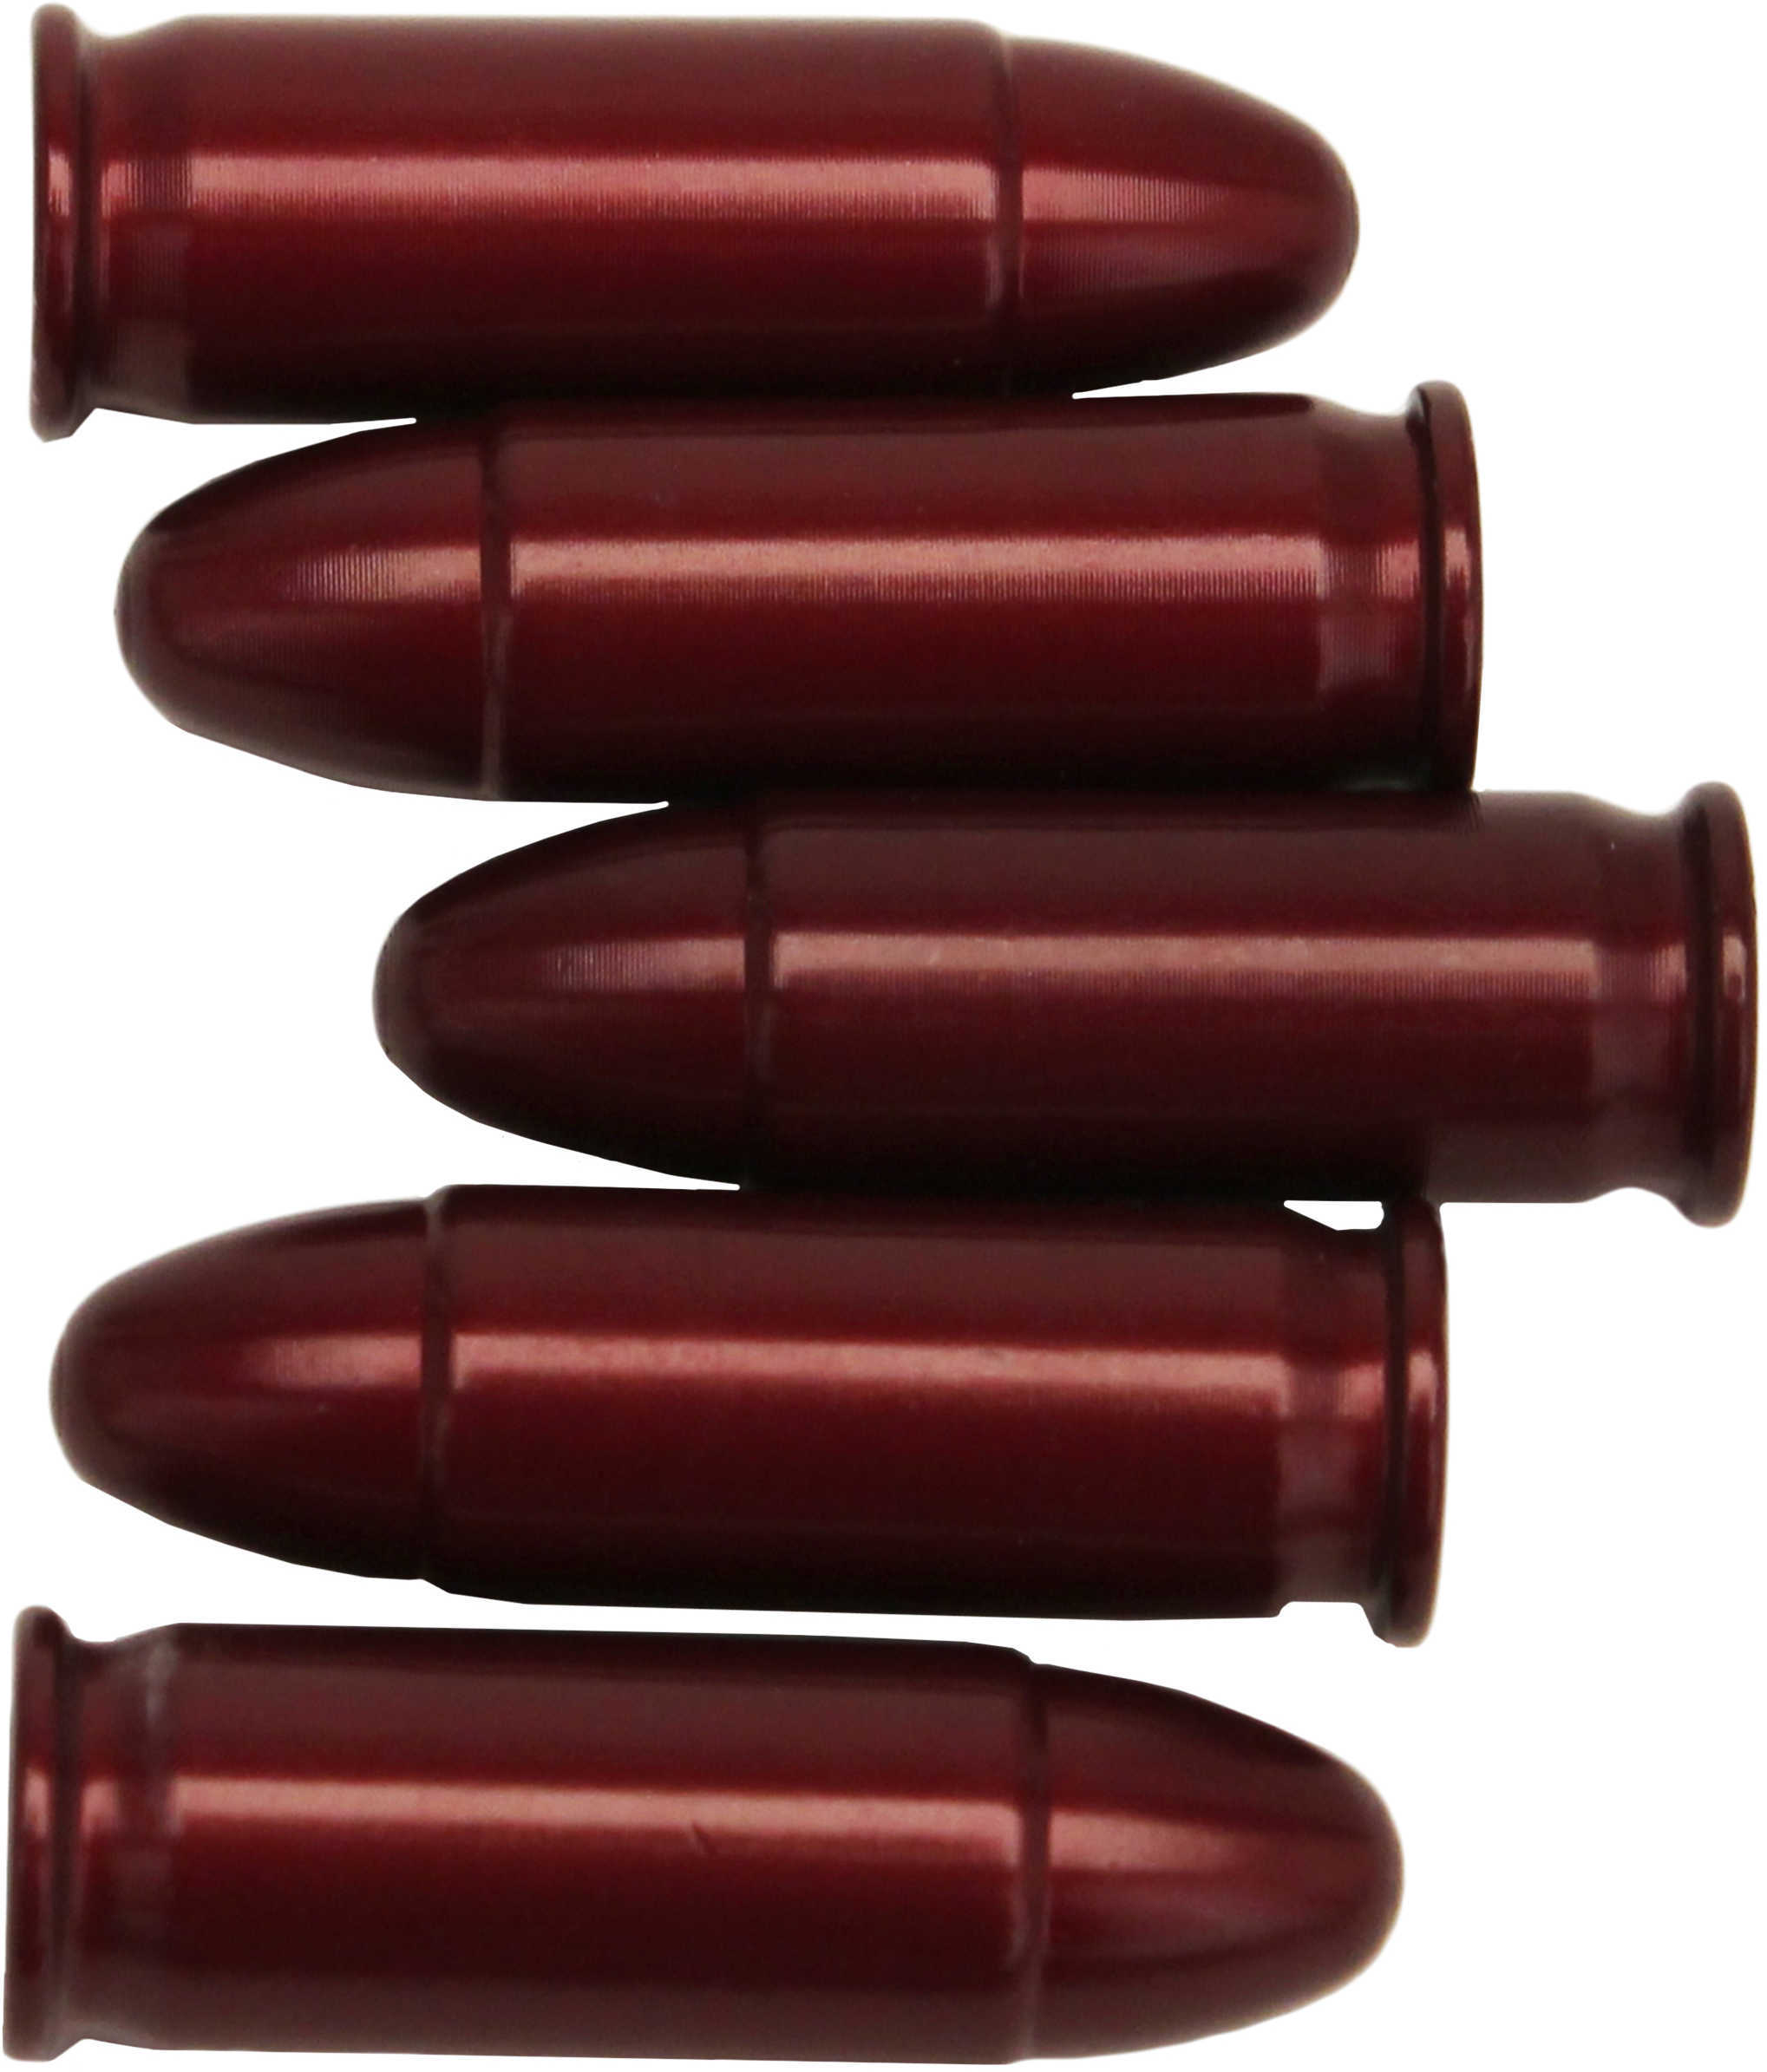 A-Zoom Precision Metal Snap Caps 38 Super, 5 per pack For safety training, function testing or safely decoc 15158